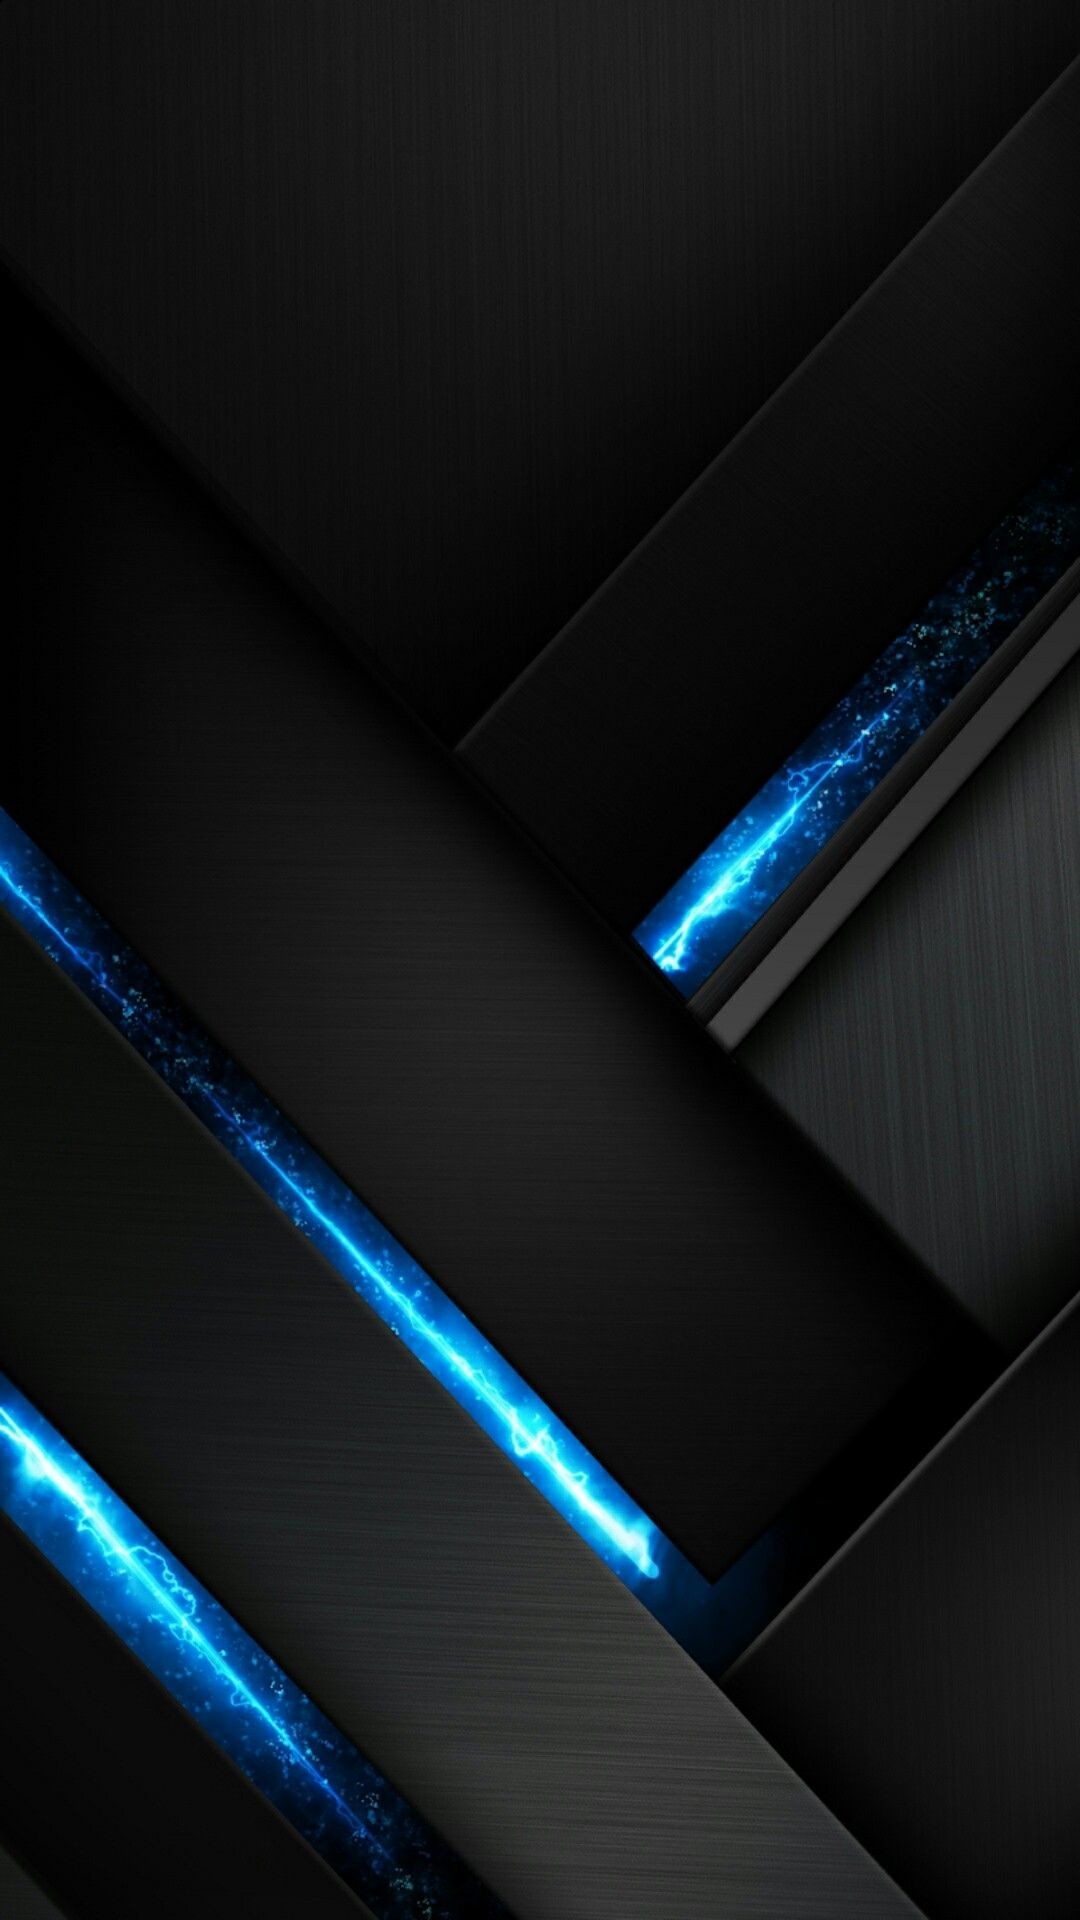 1080x1920, Black And Blue Abstract Wallpaper 
 Data - Black And Blue Abstract - HD Wallpaper 